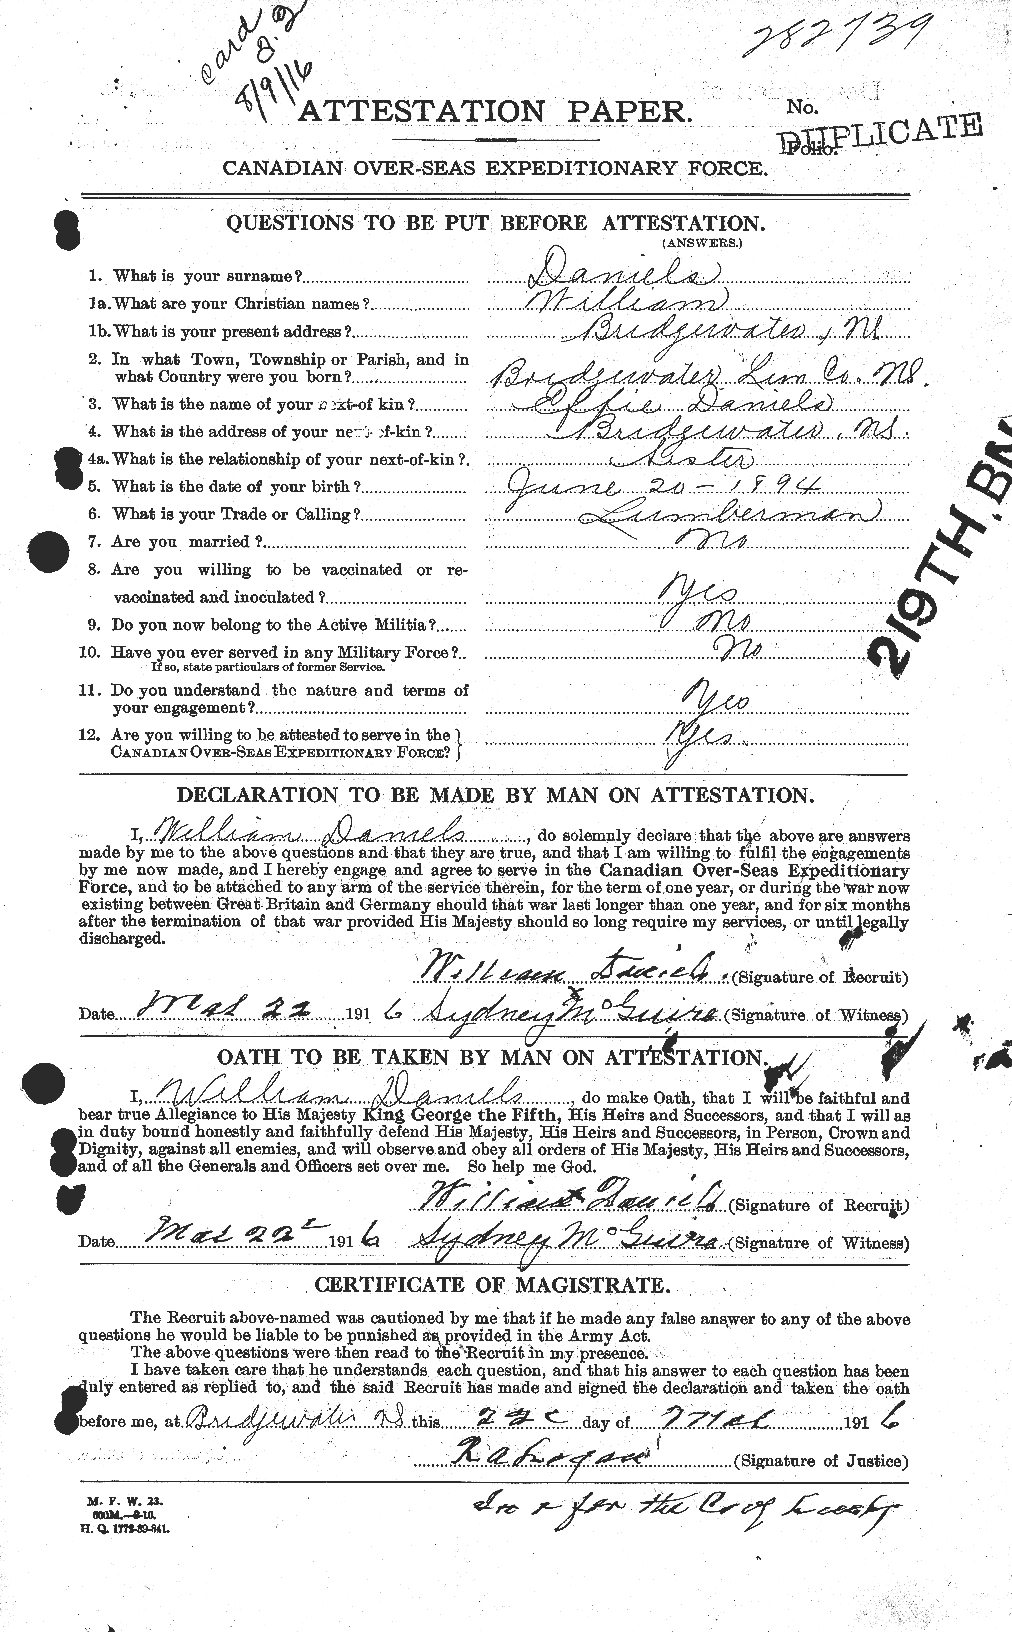 Personnel Records of the First World War - CEF 279688a